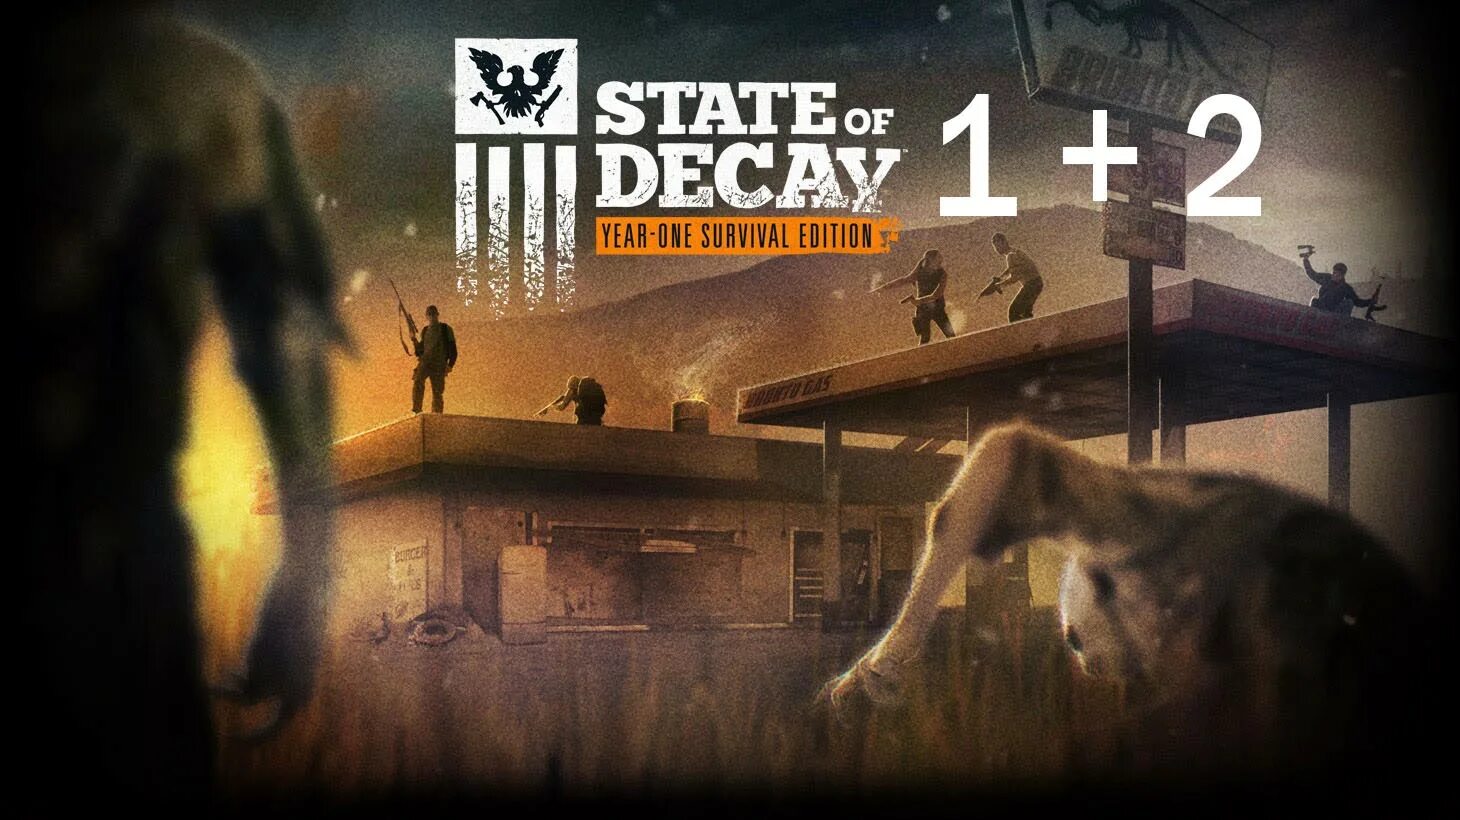 State of Decay yose - Day one Edition. State of Decay 4. State of Decay 1.